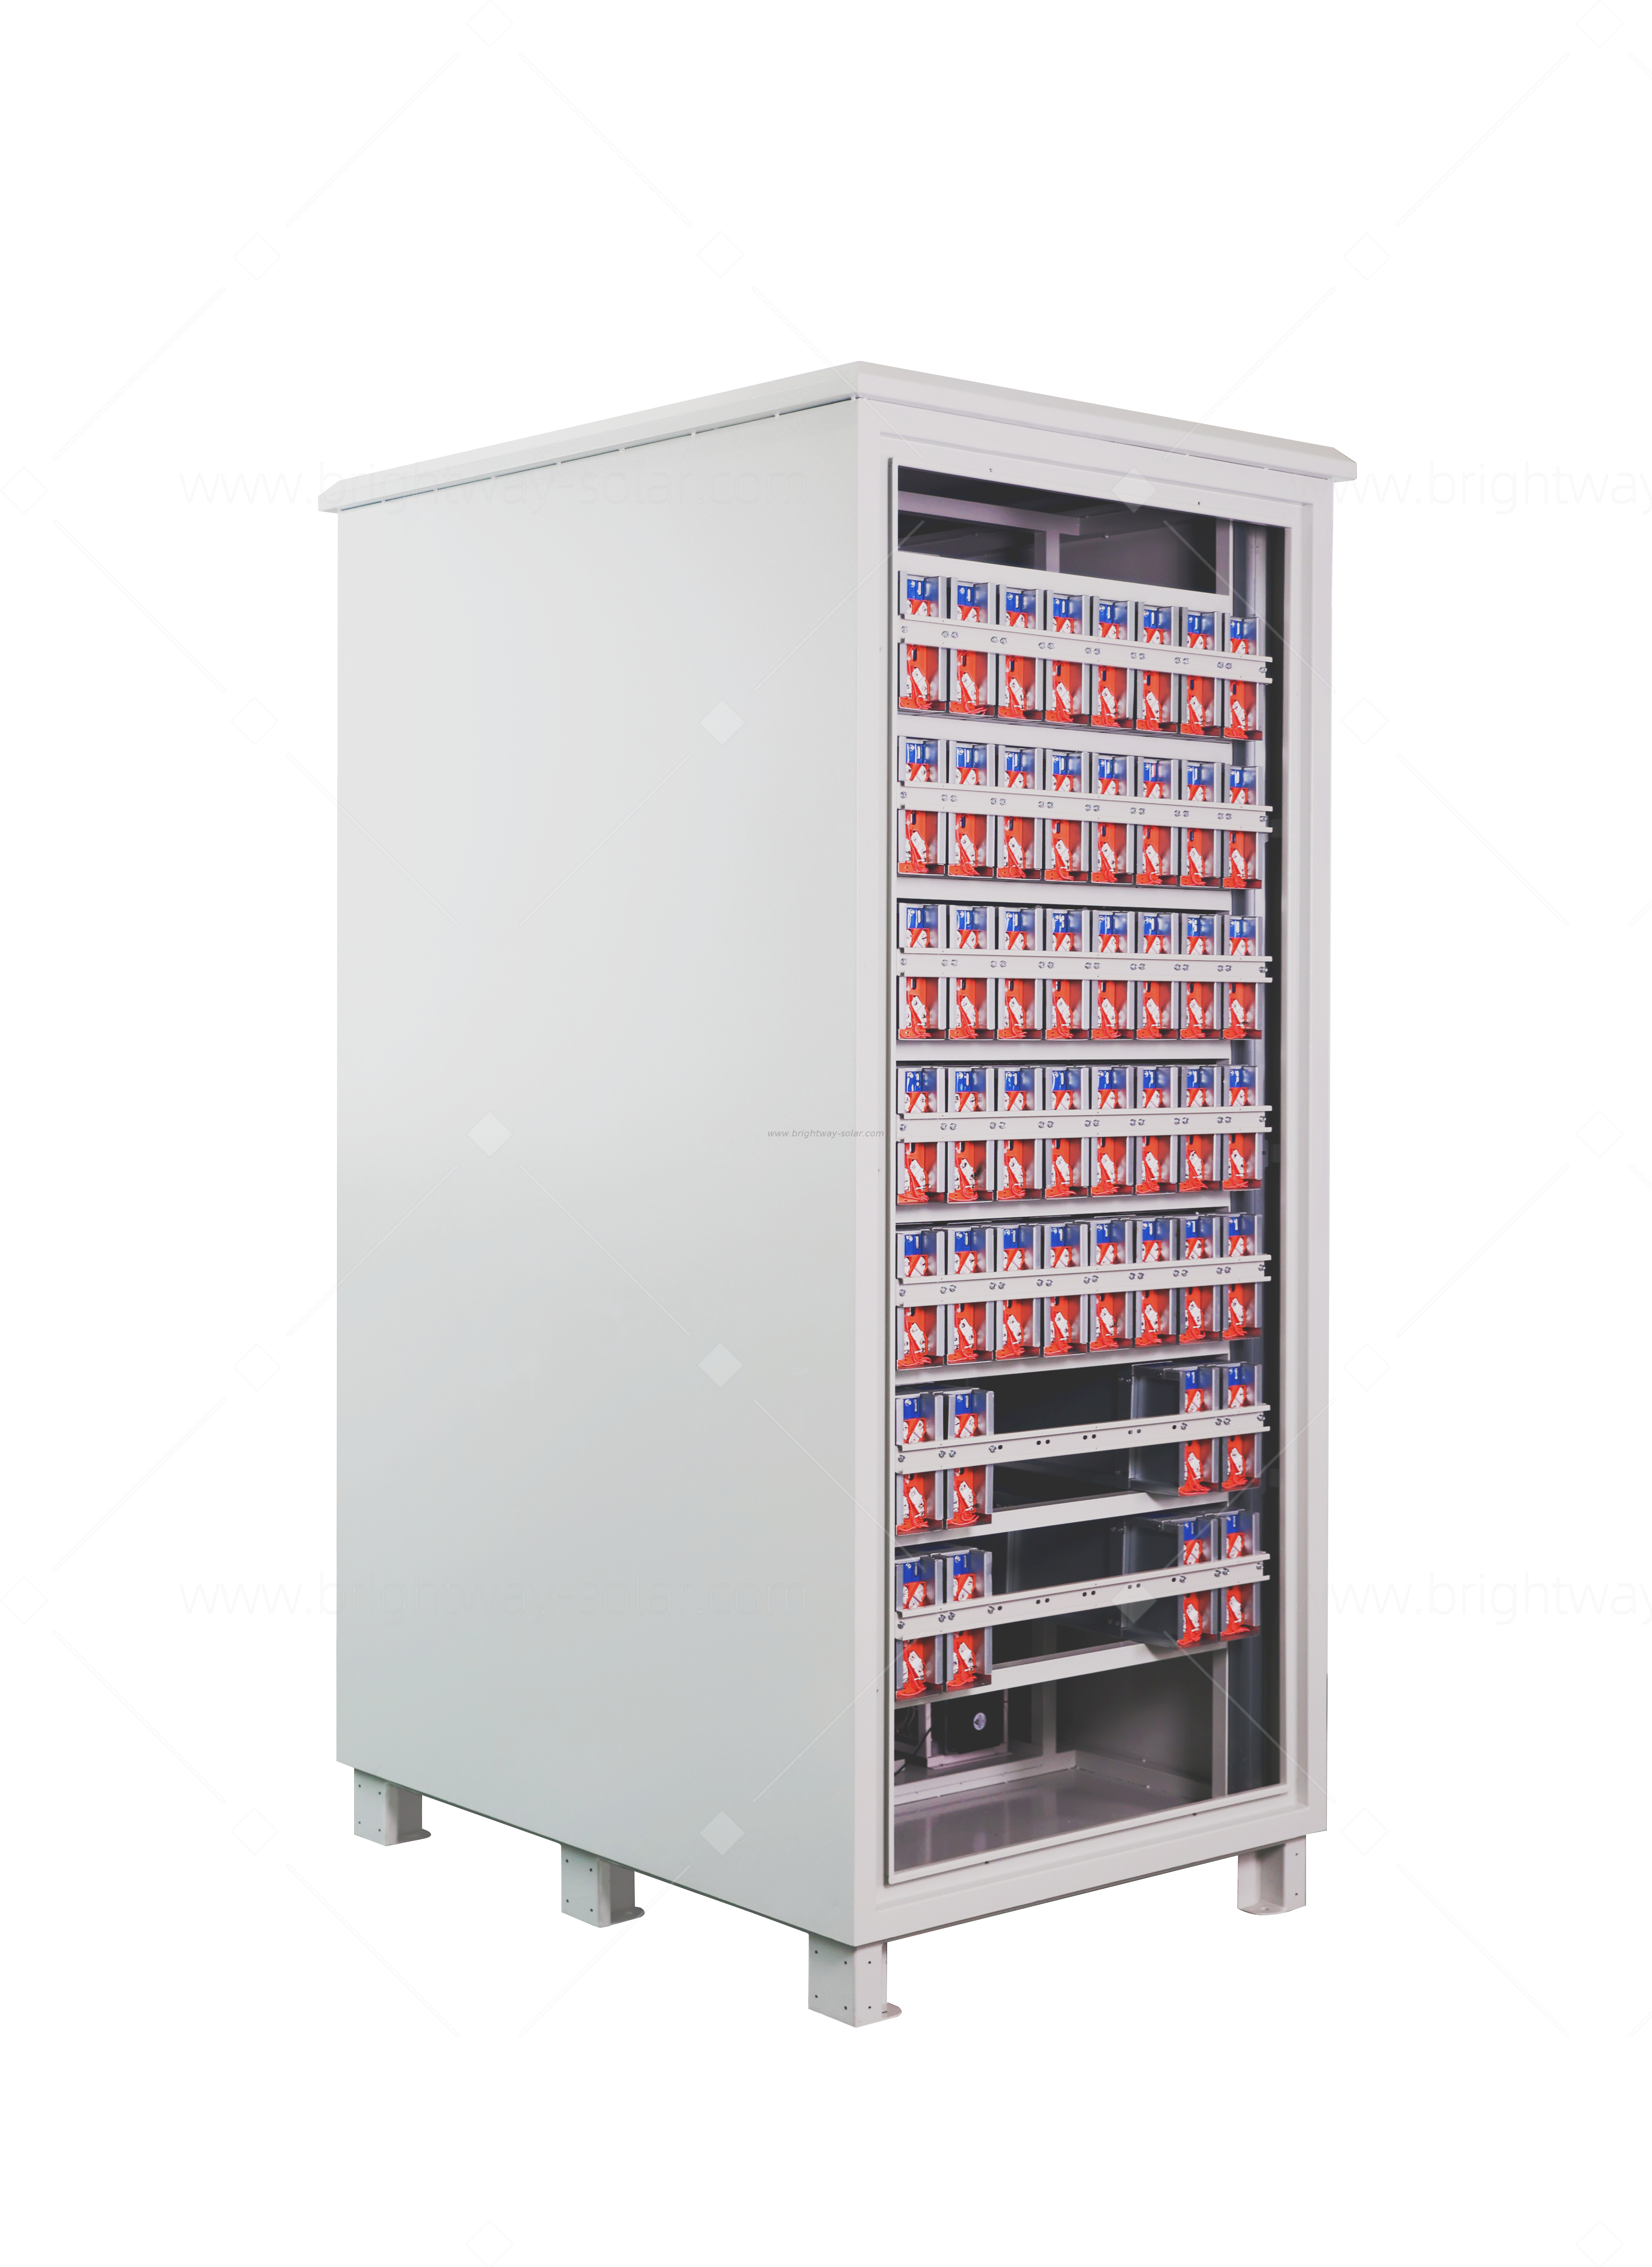 Brightway Solar 40kW Long Cycle Life Outdoor Power Storage Cabinet Solution for Commercial Industrial Use with Grid Connectivity Flexibility